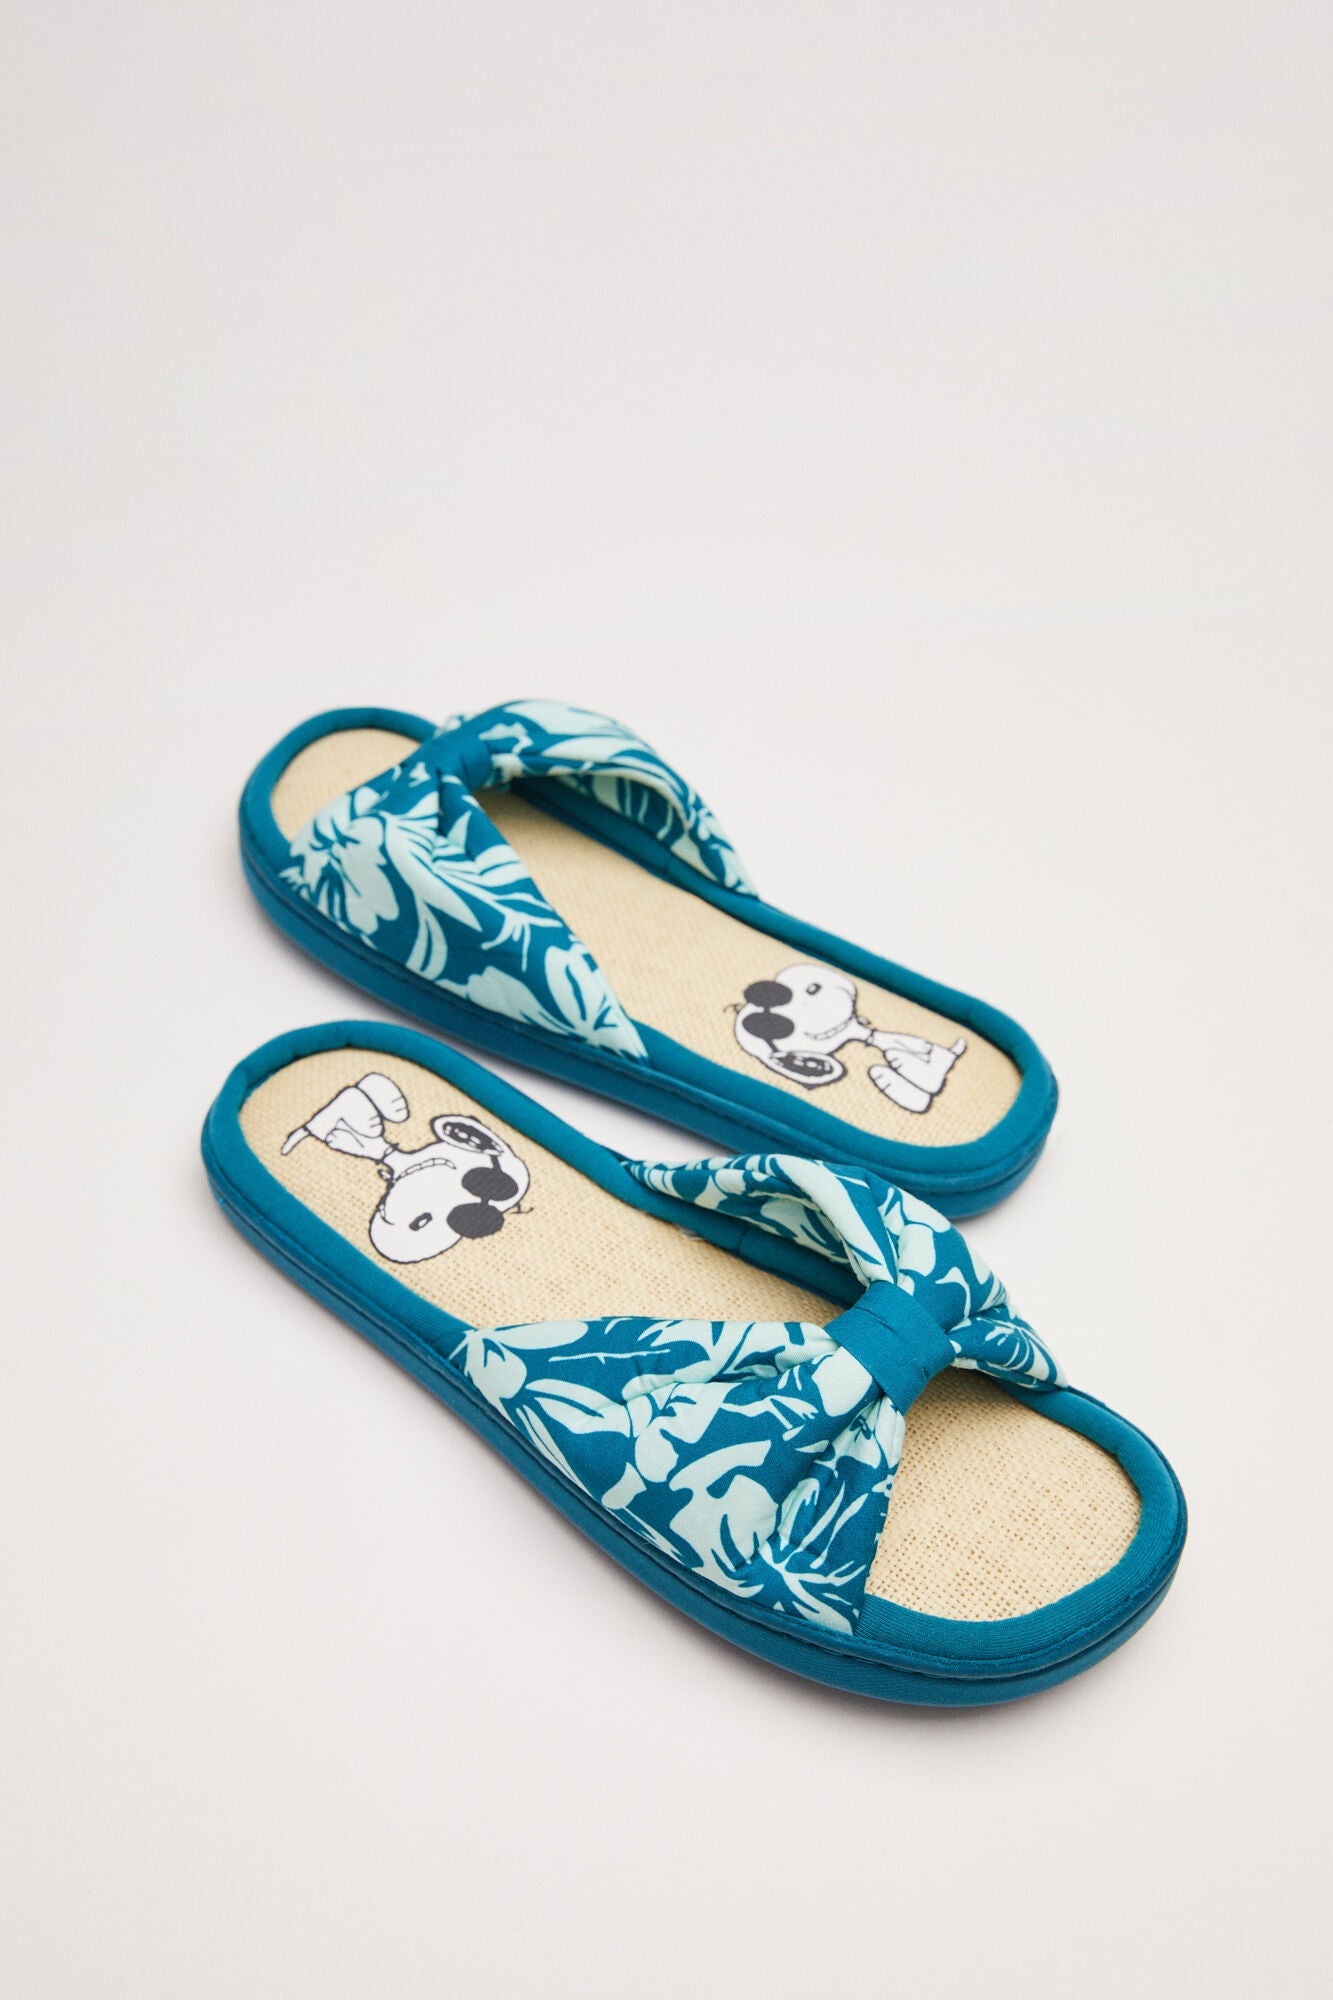 Snoopy Sandals